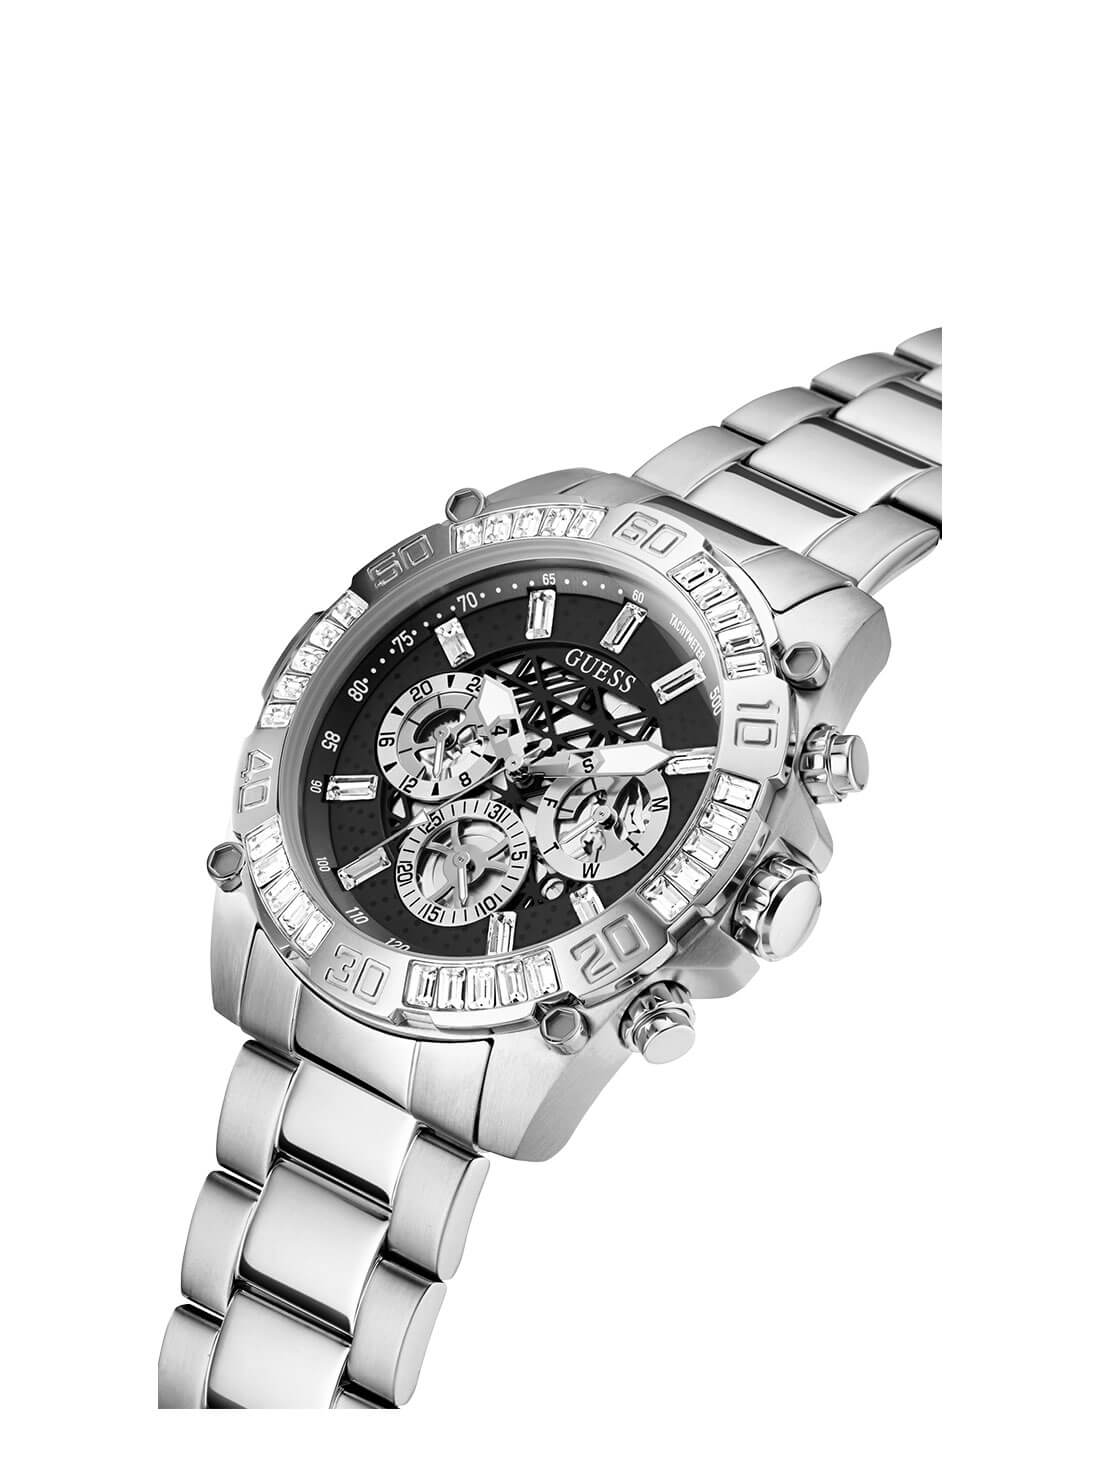    GUESS Mens Silver Trophy Watch GW0390G1 Side Angle View